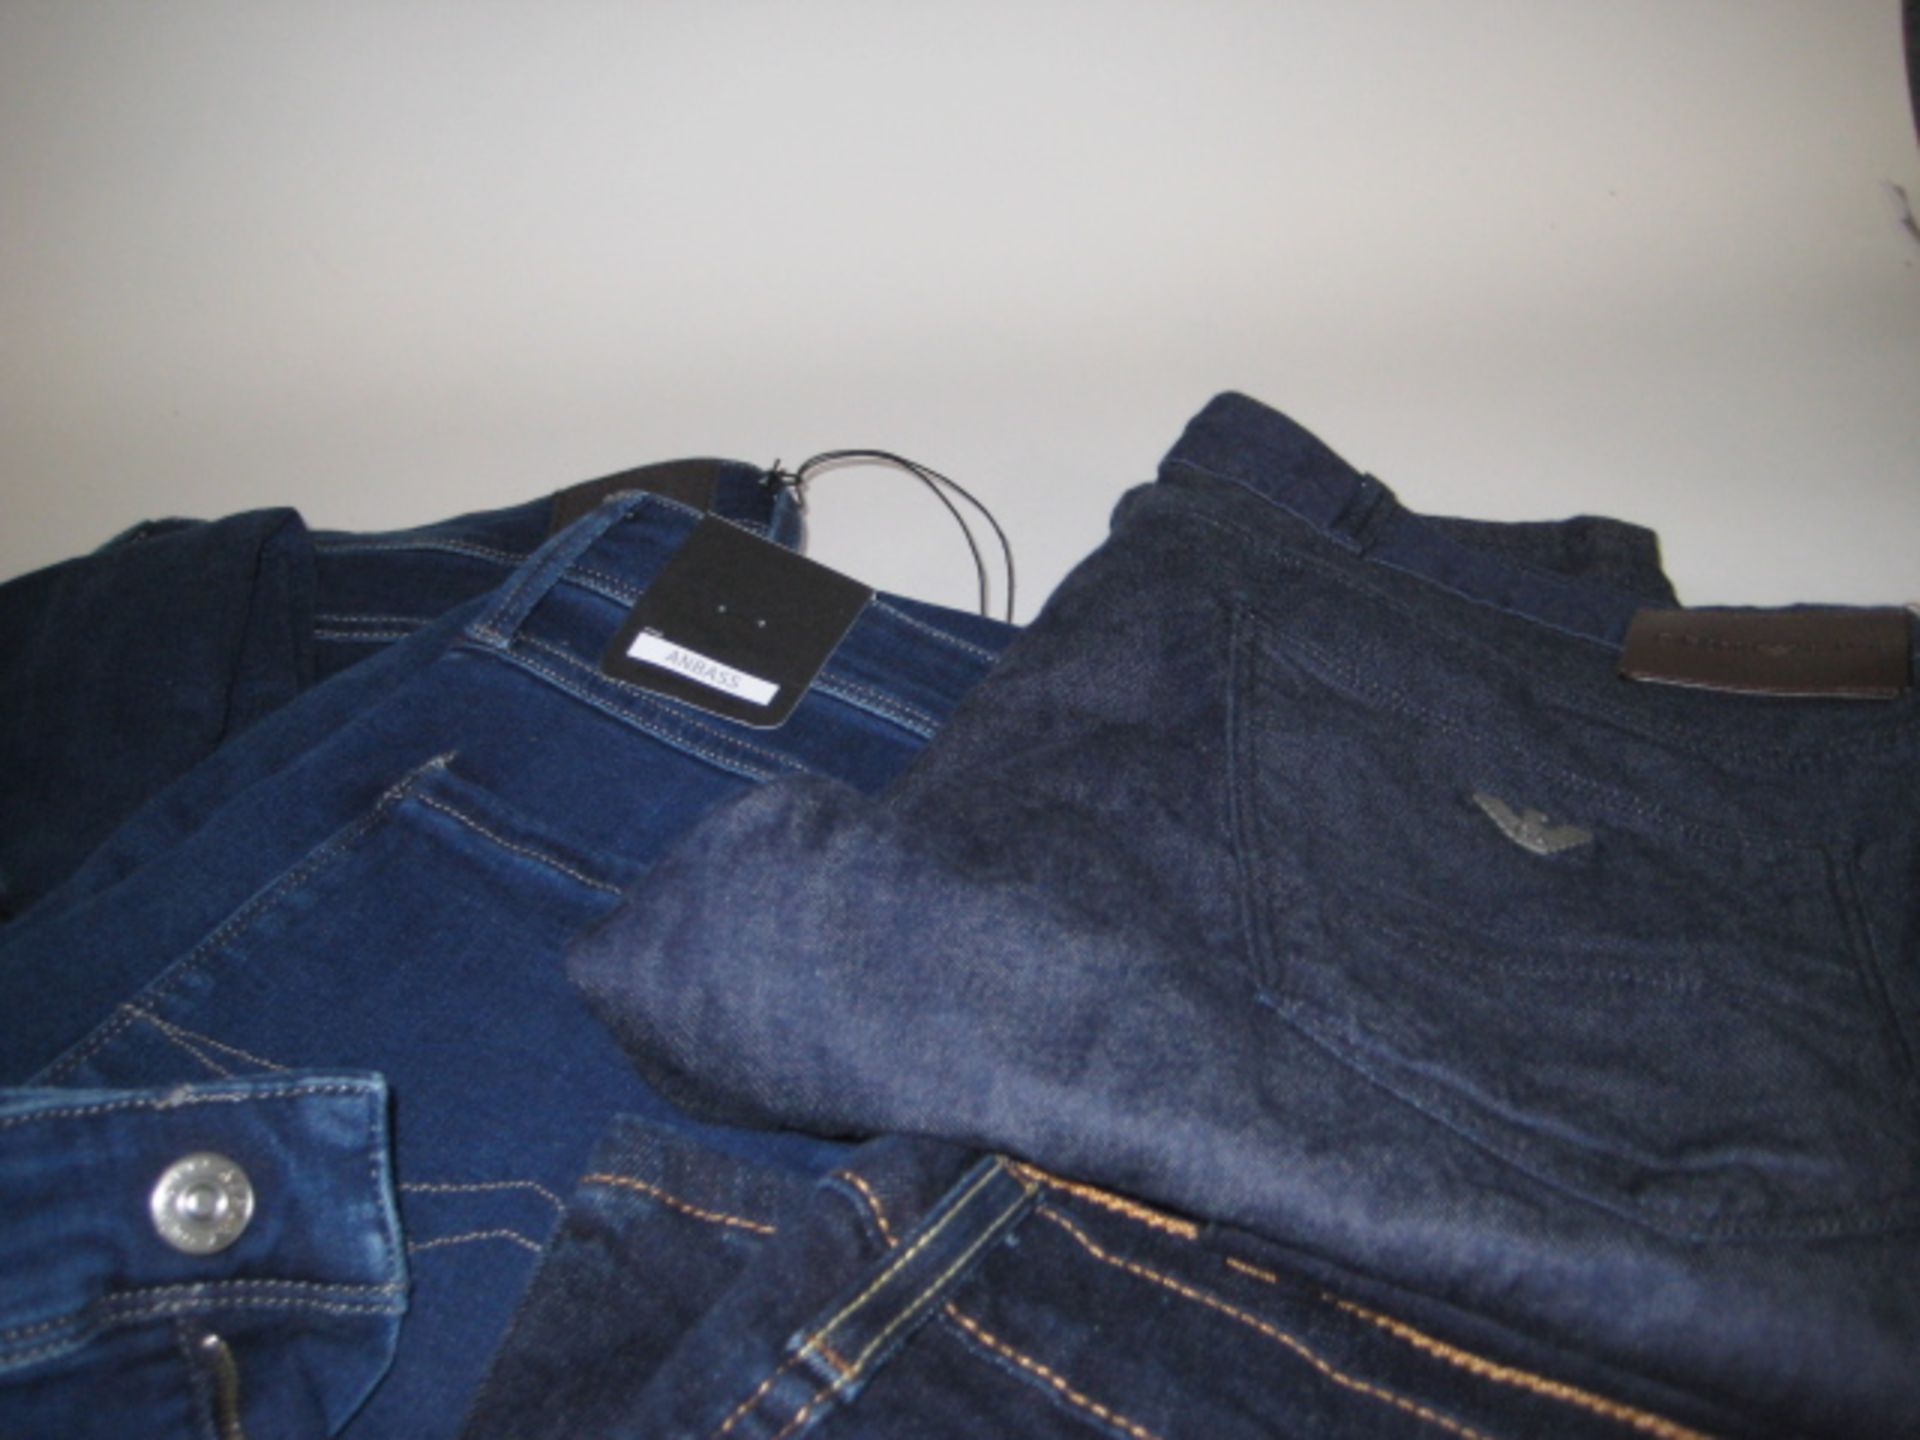 6 pairs of Tag replay jeans various sizes together with 2 pairs of untagged Levi jeans, various - Image 3 of 3